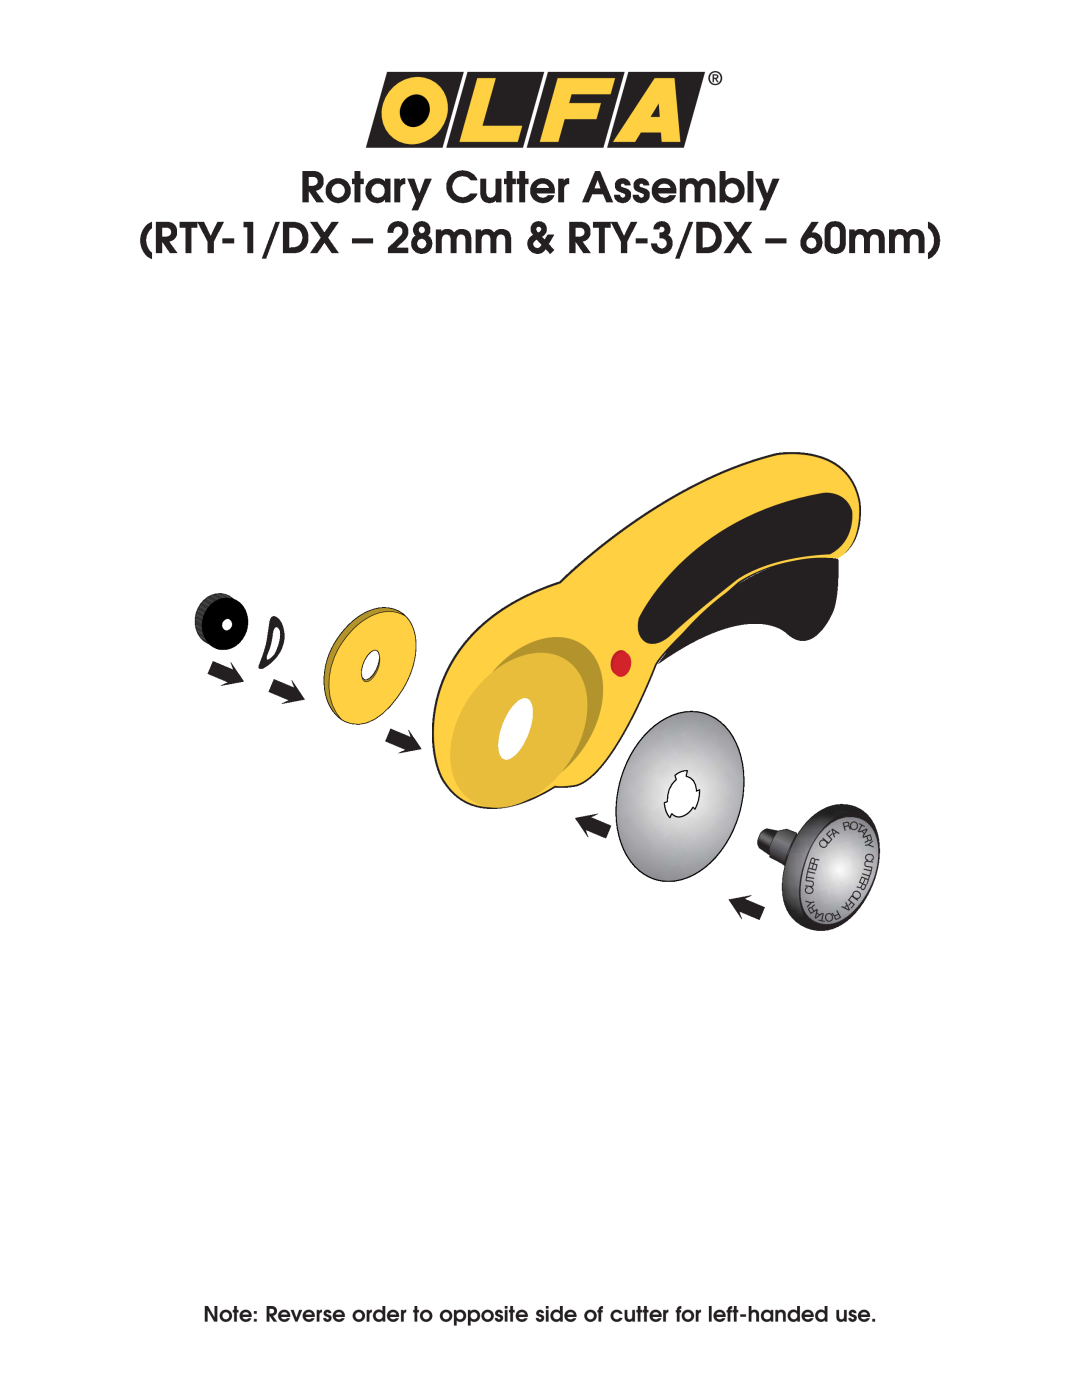 Olfa manual Rotary Cutter Assembly, RTY-1/DX- 28mm & RTY-3/DX- 60mm 